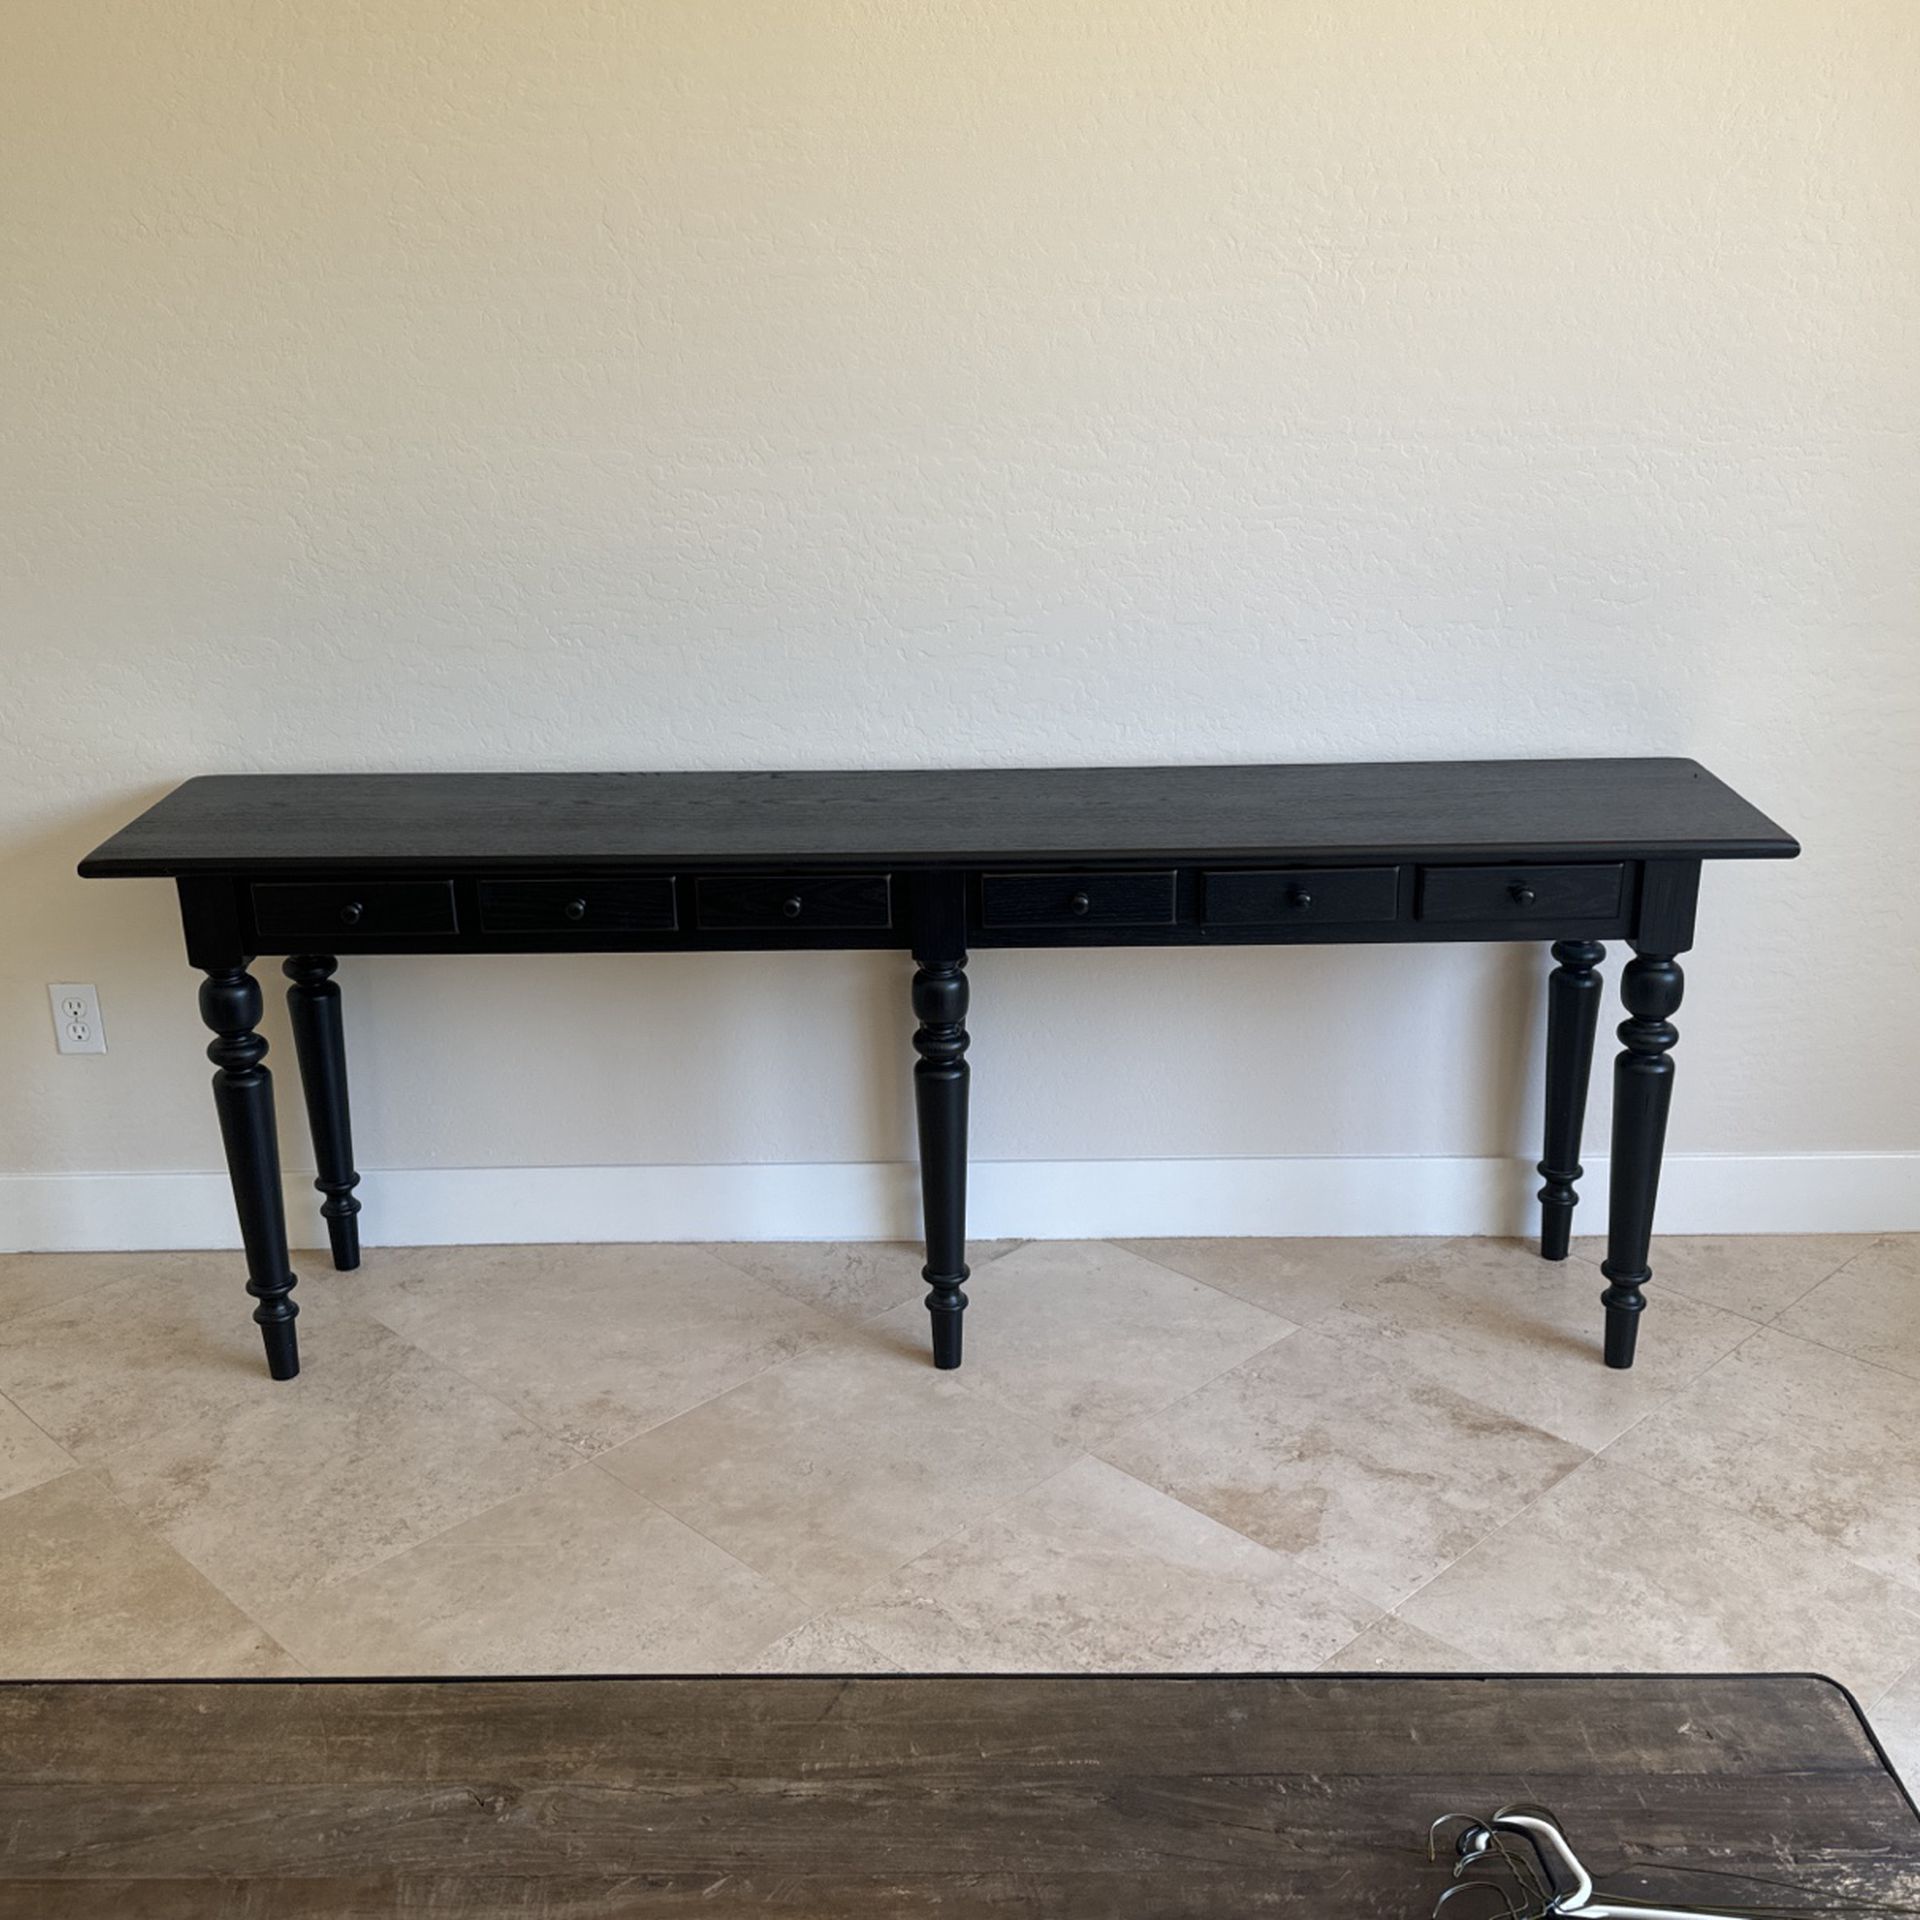 Pottery Barn Black Console Table - 7ft Long 